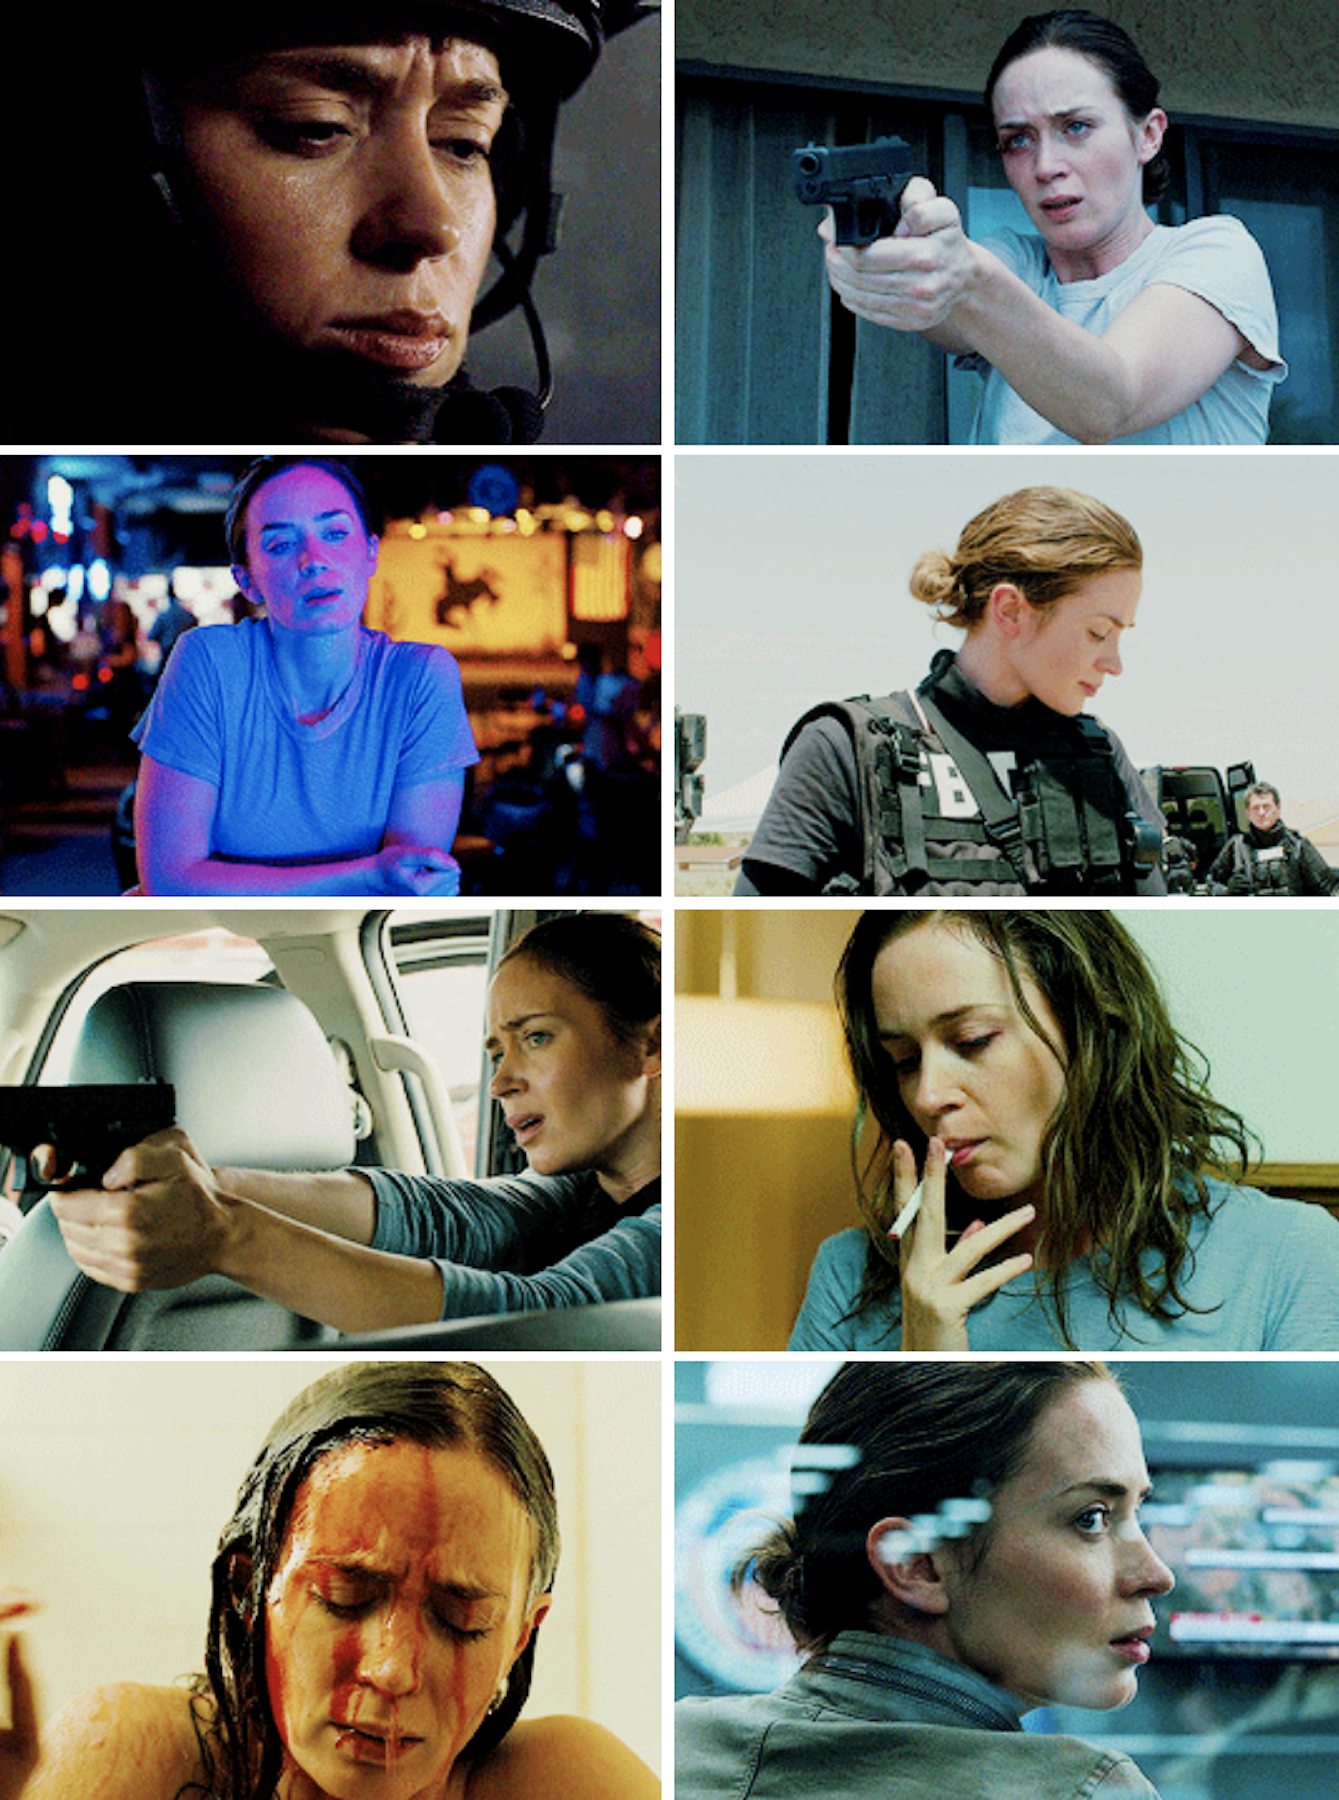 Blunt as KAte Macer in &quot;Sicario&quot; shooting a gun, smoking, and taking a shower to wash blood off of herself